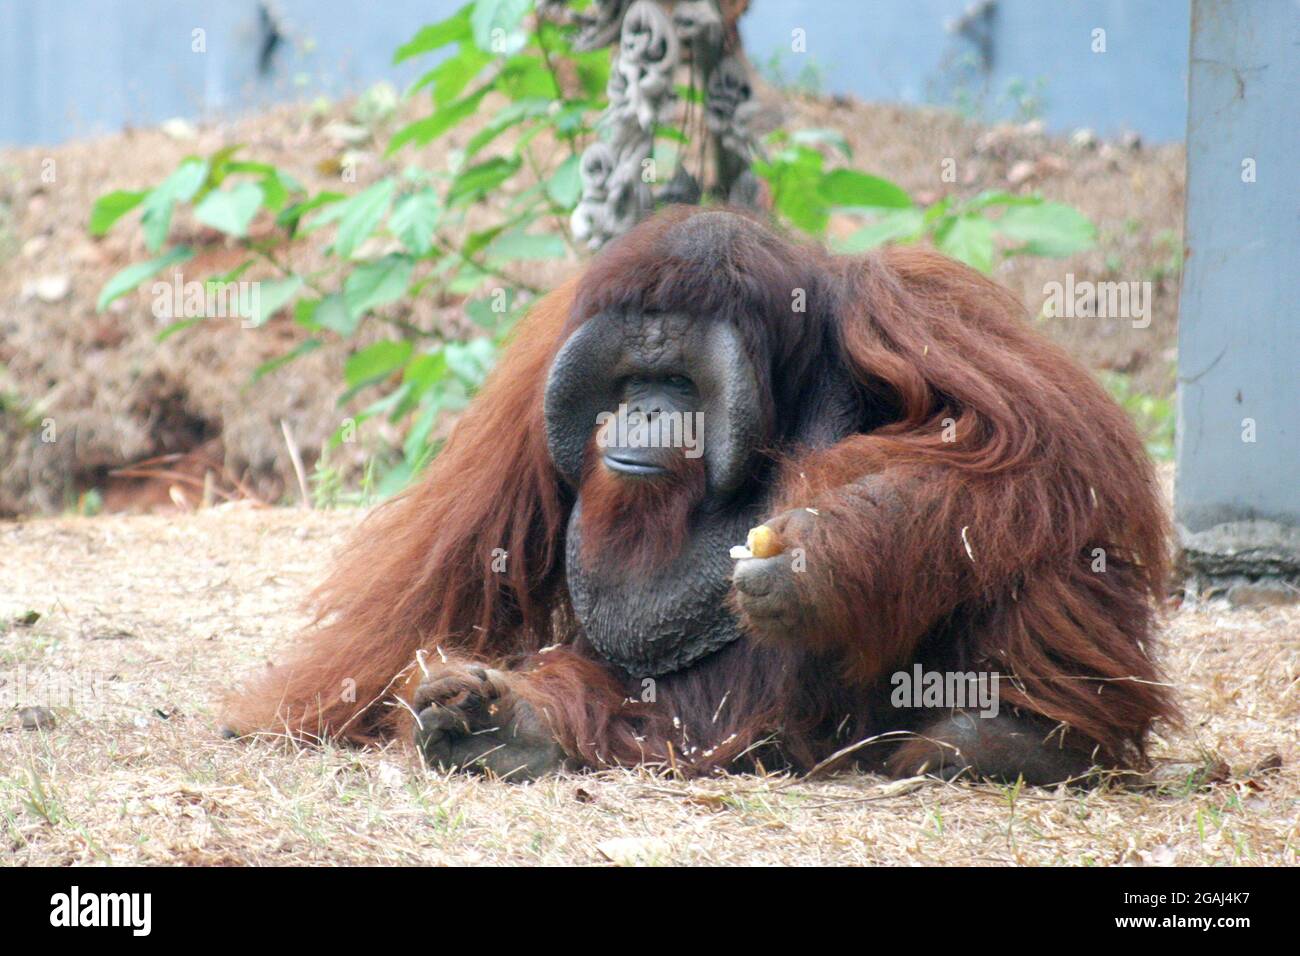 chantek the orangutan discussed in the text